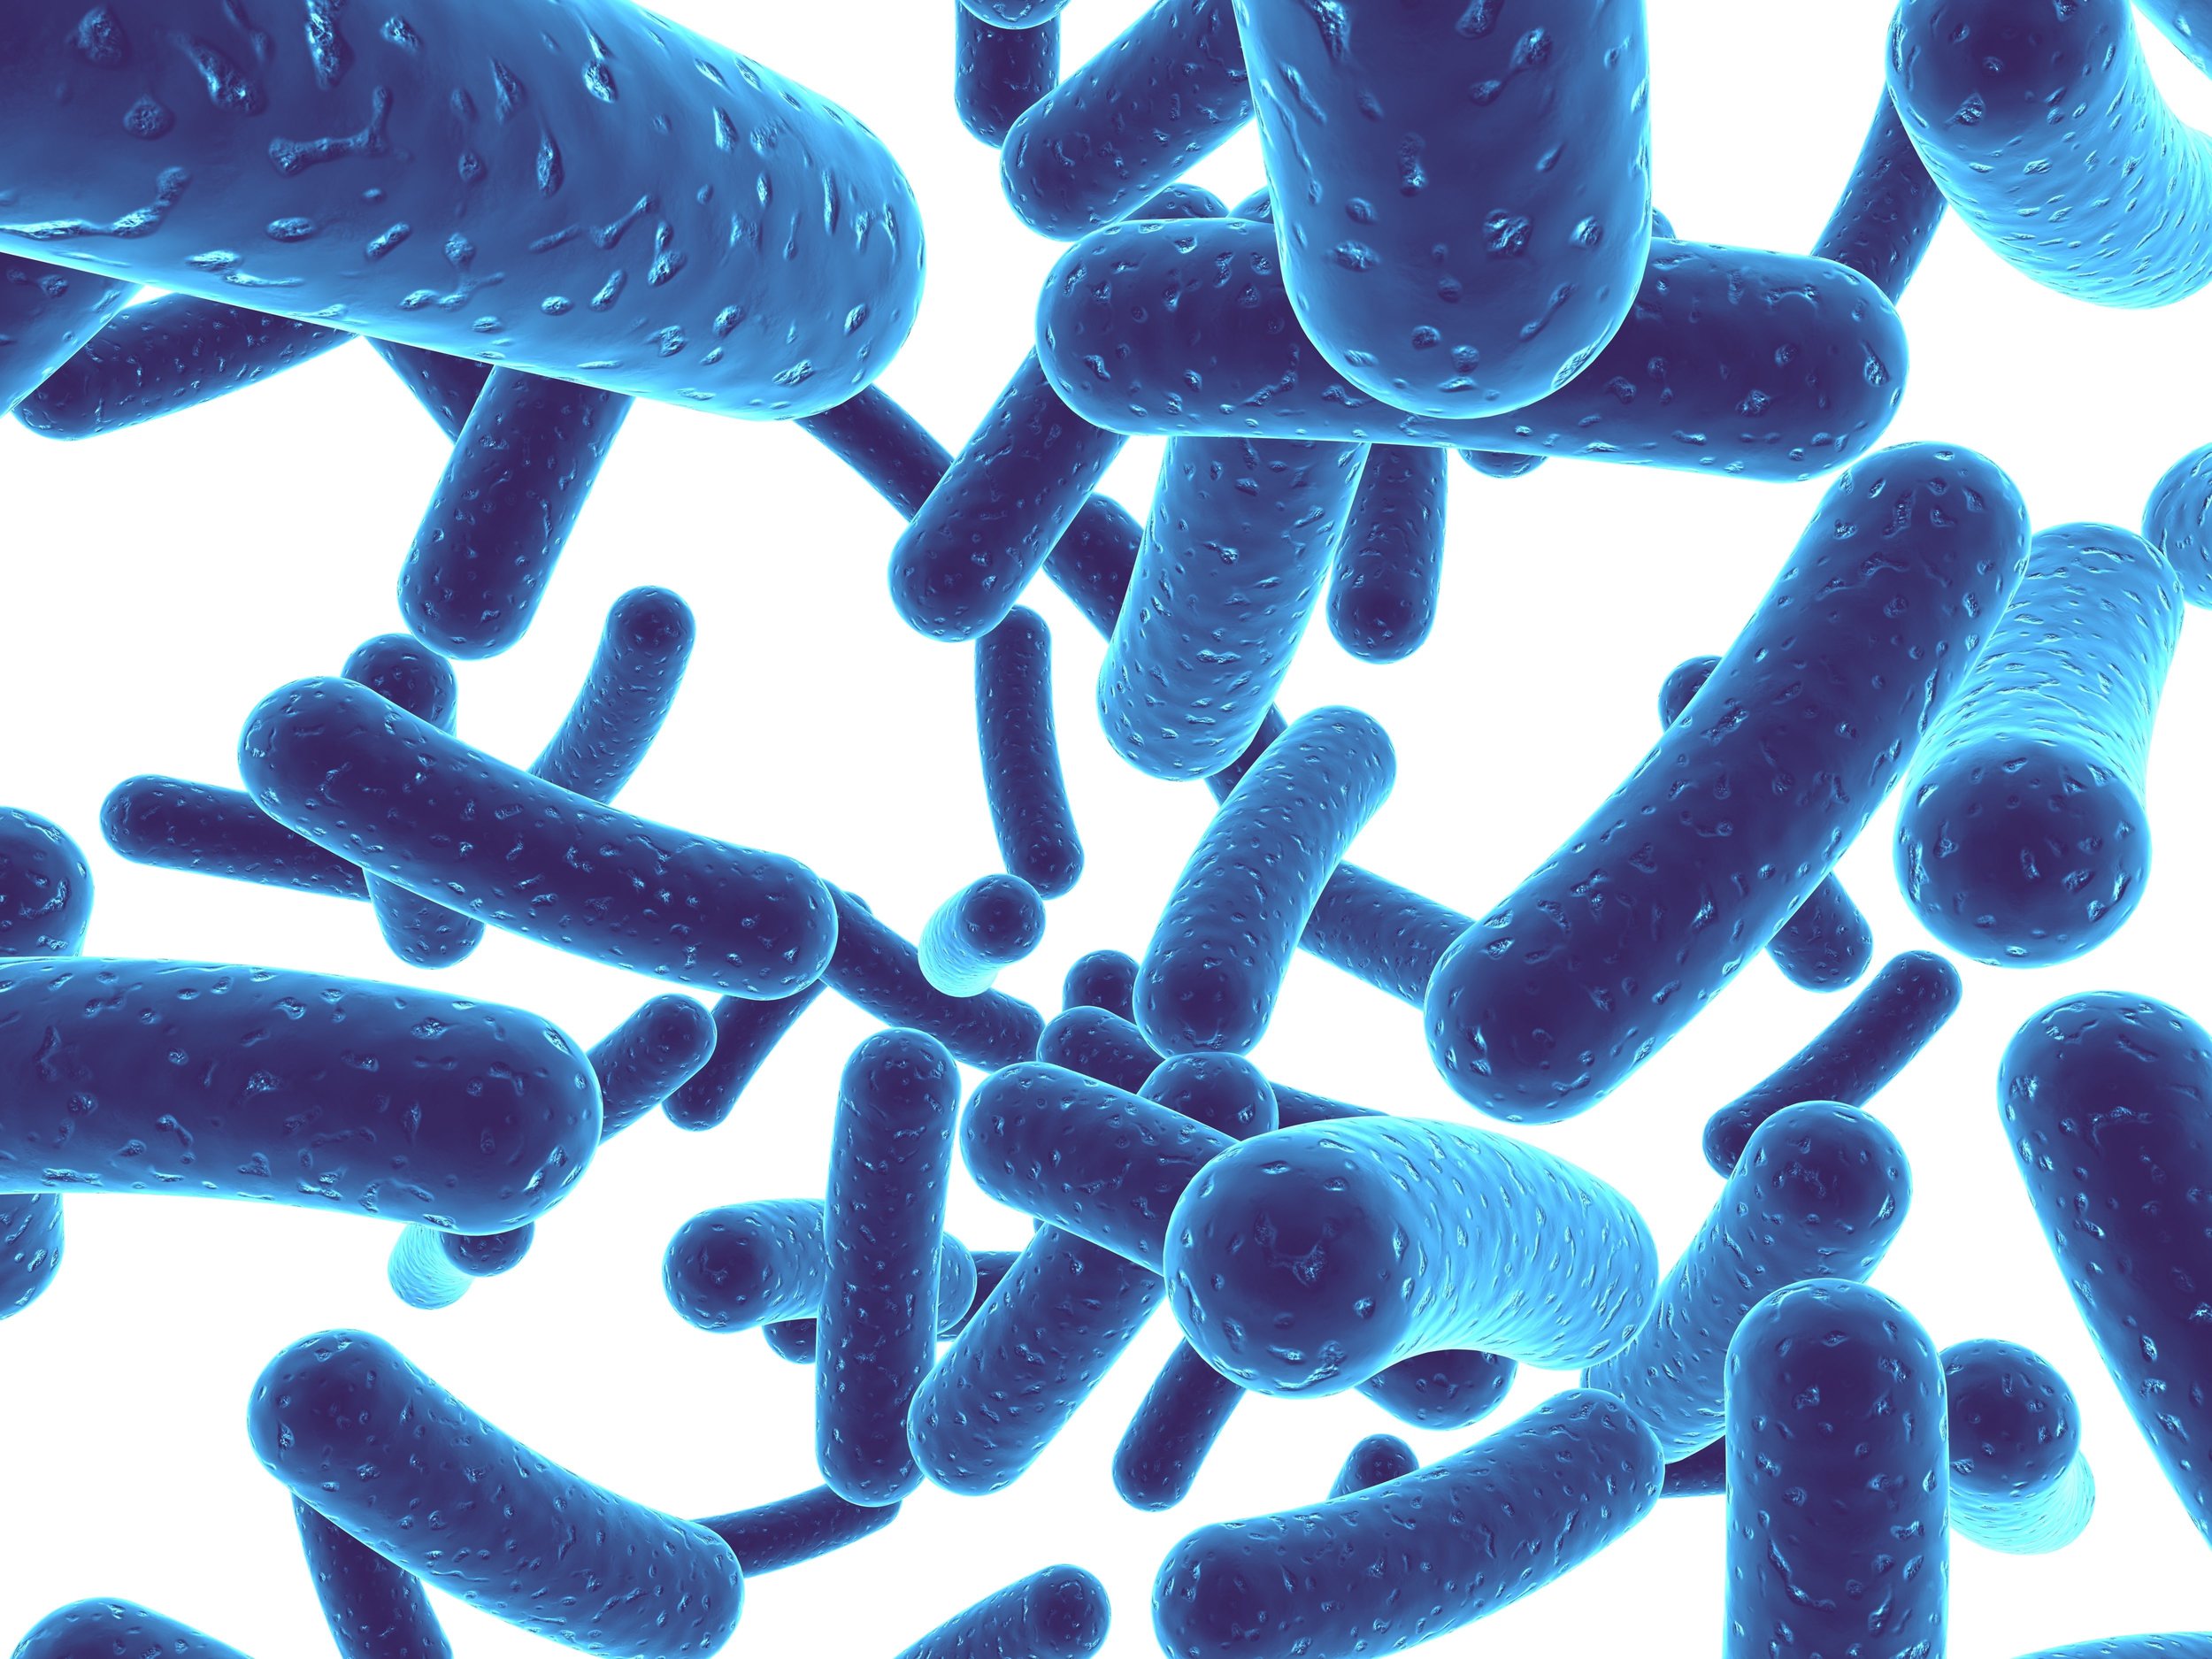 Bacteria. Probiotic bacteria supports the endocannabinoid system.